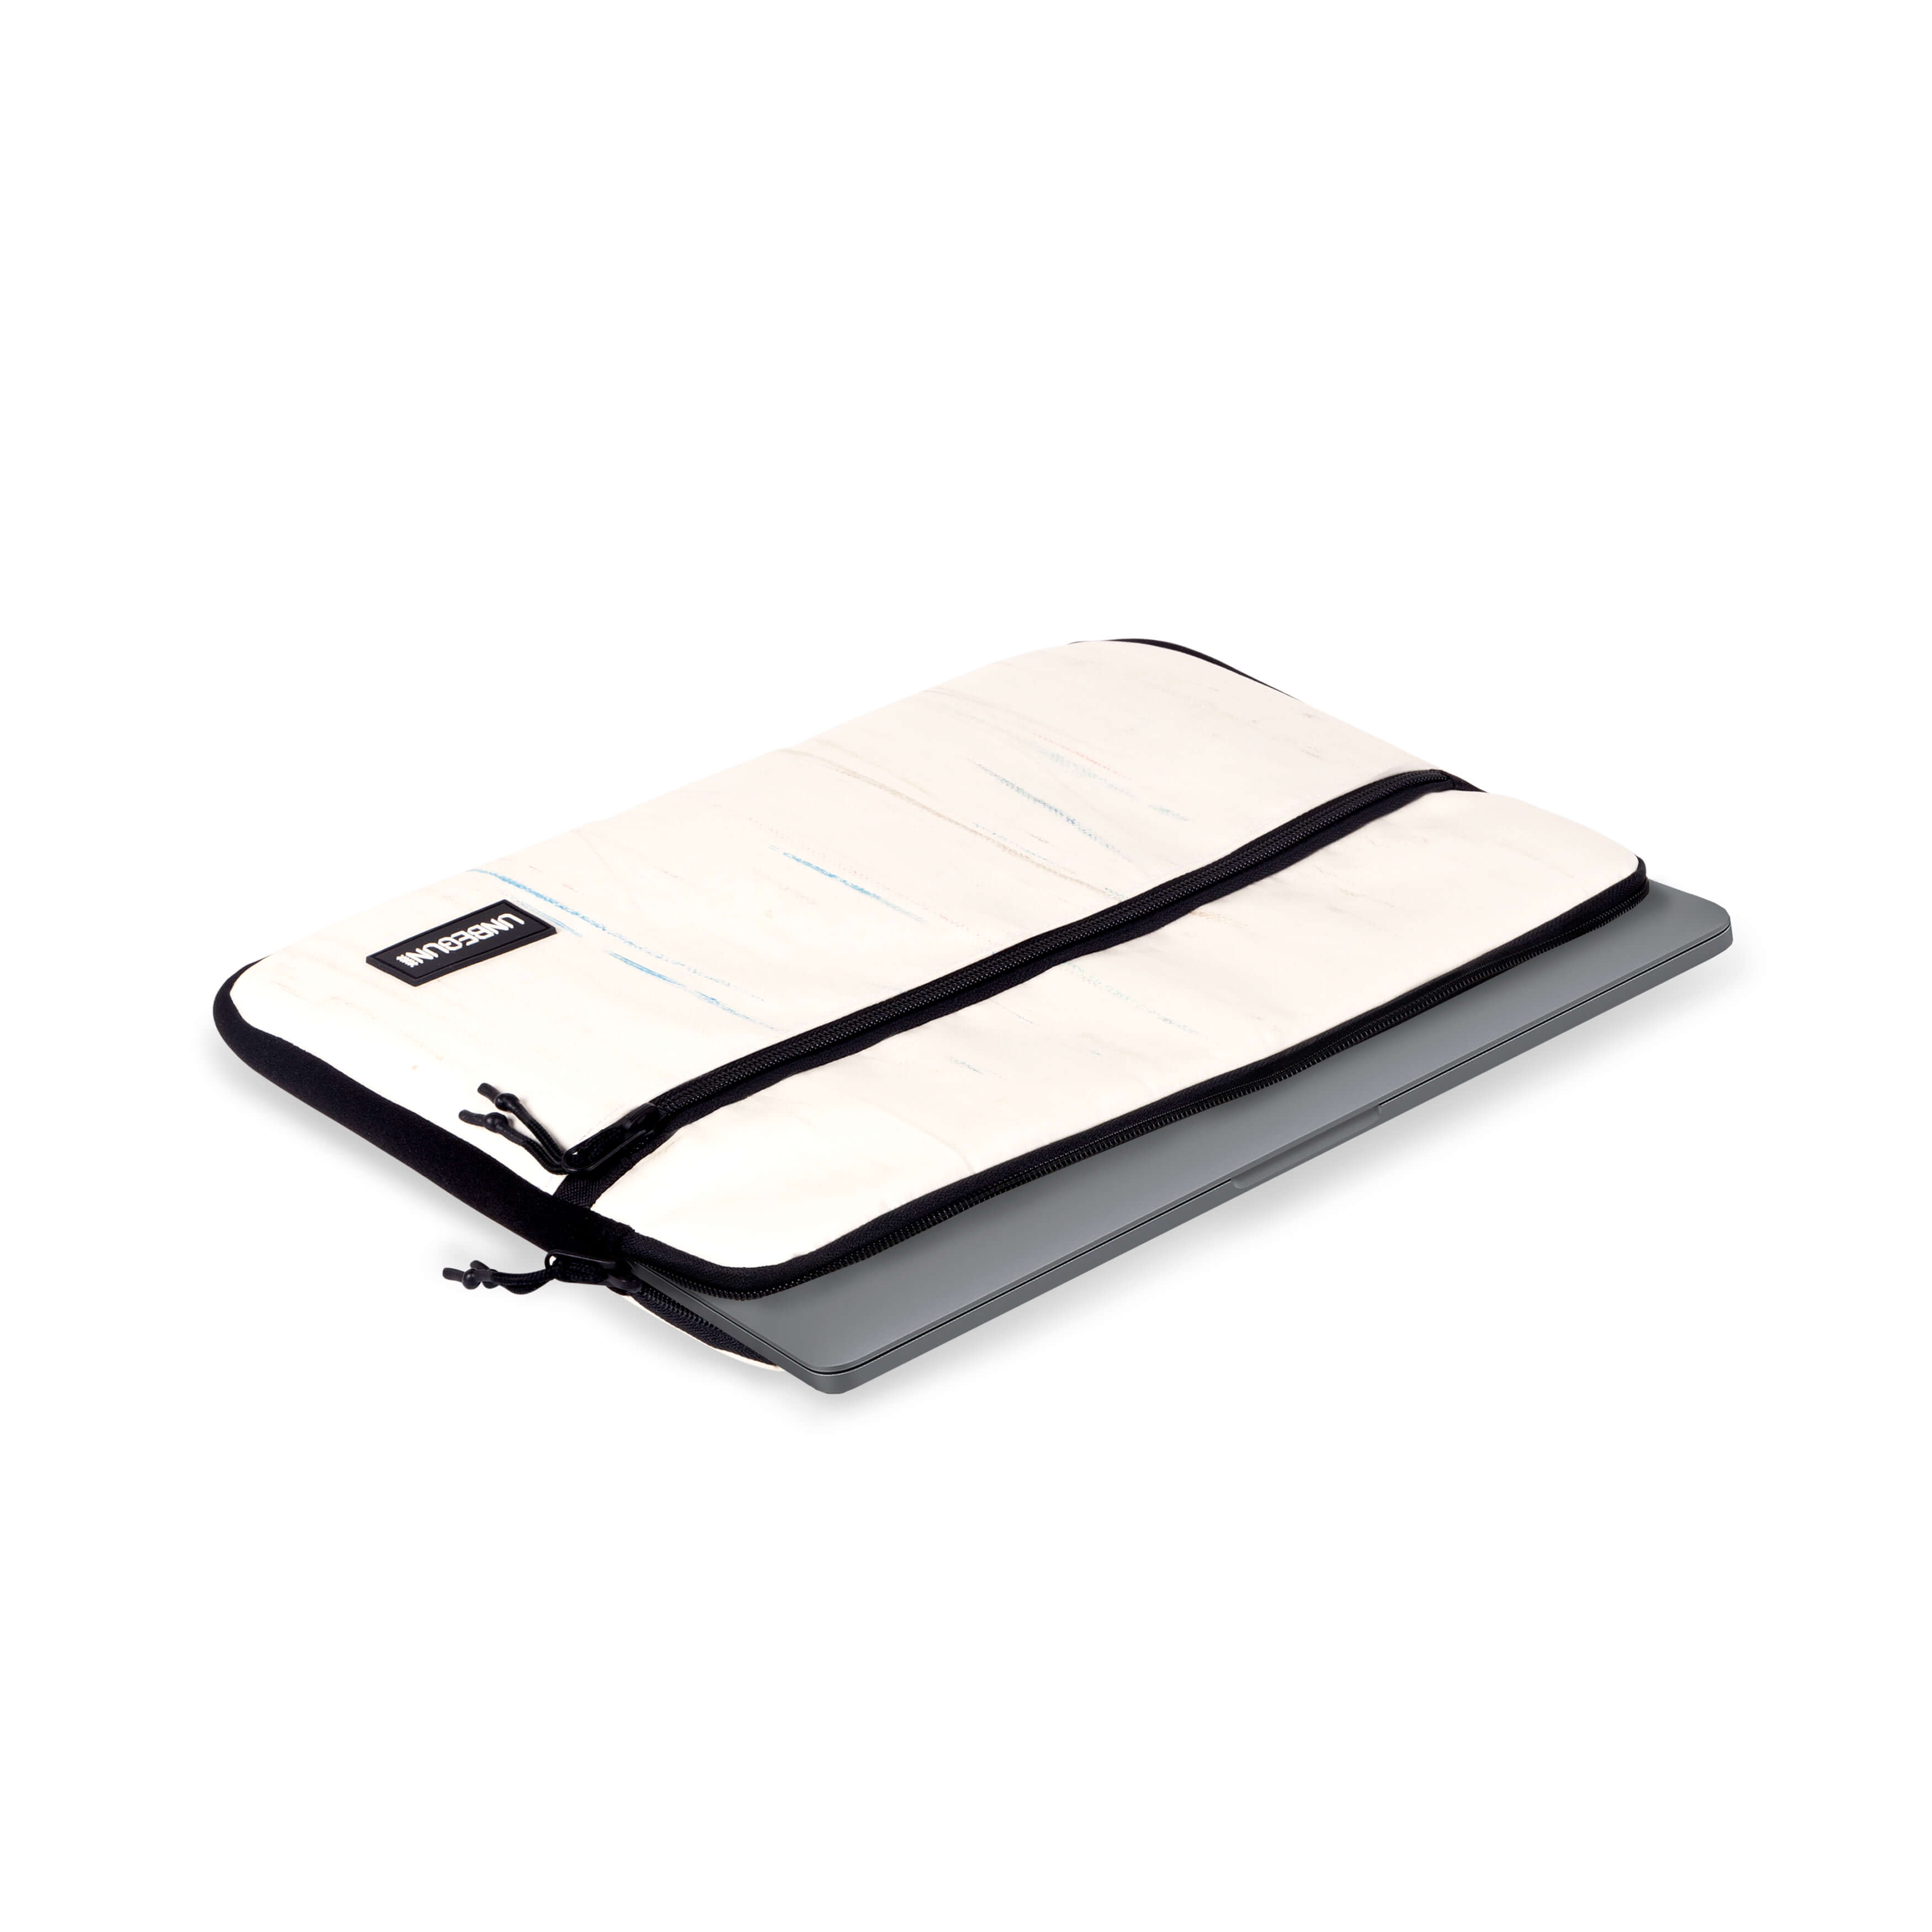 Laptop Case With Front Compartment - Multicolor 7